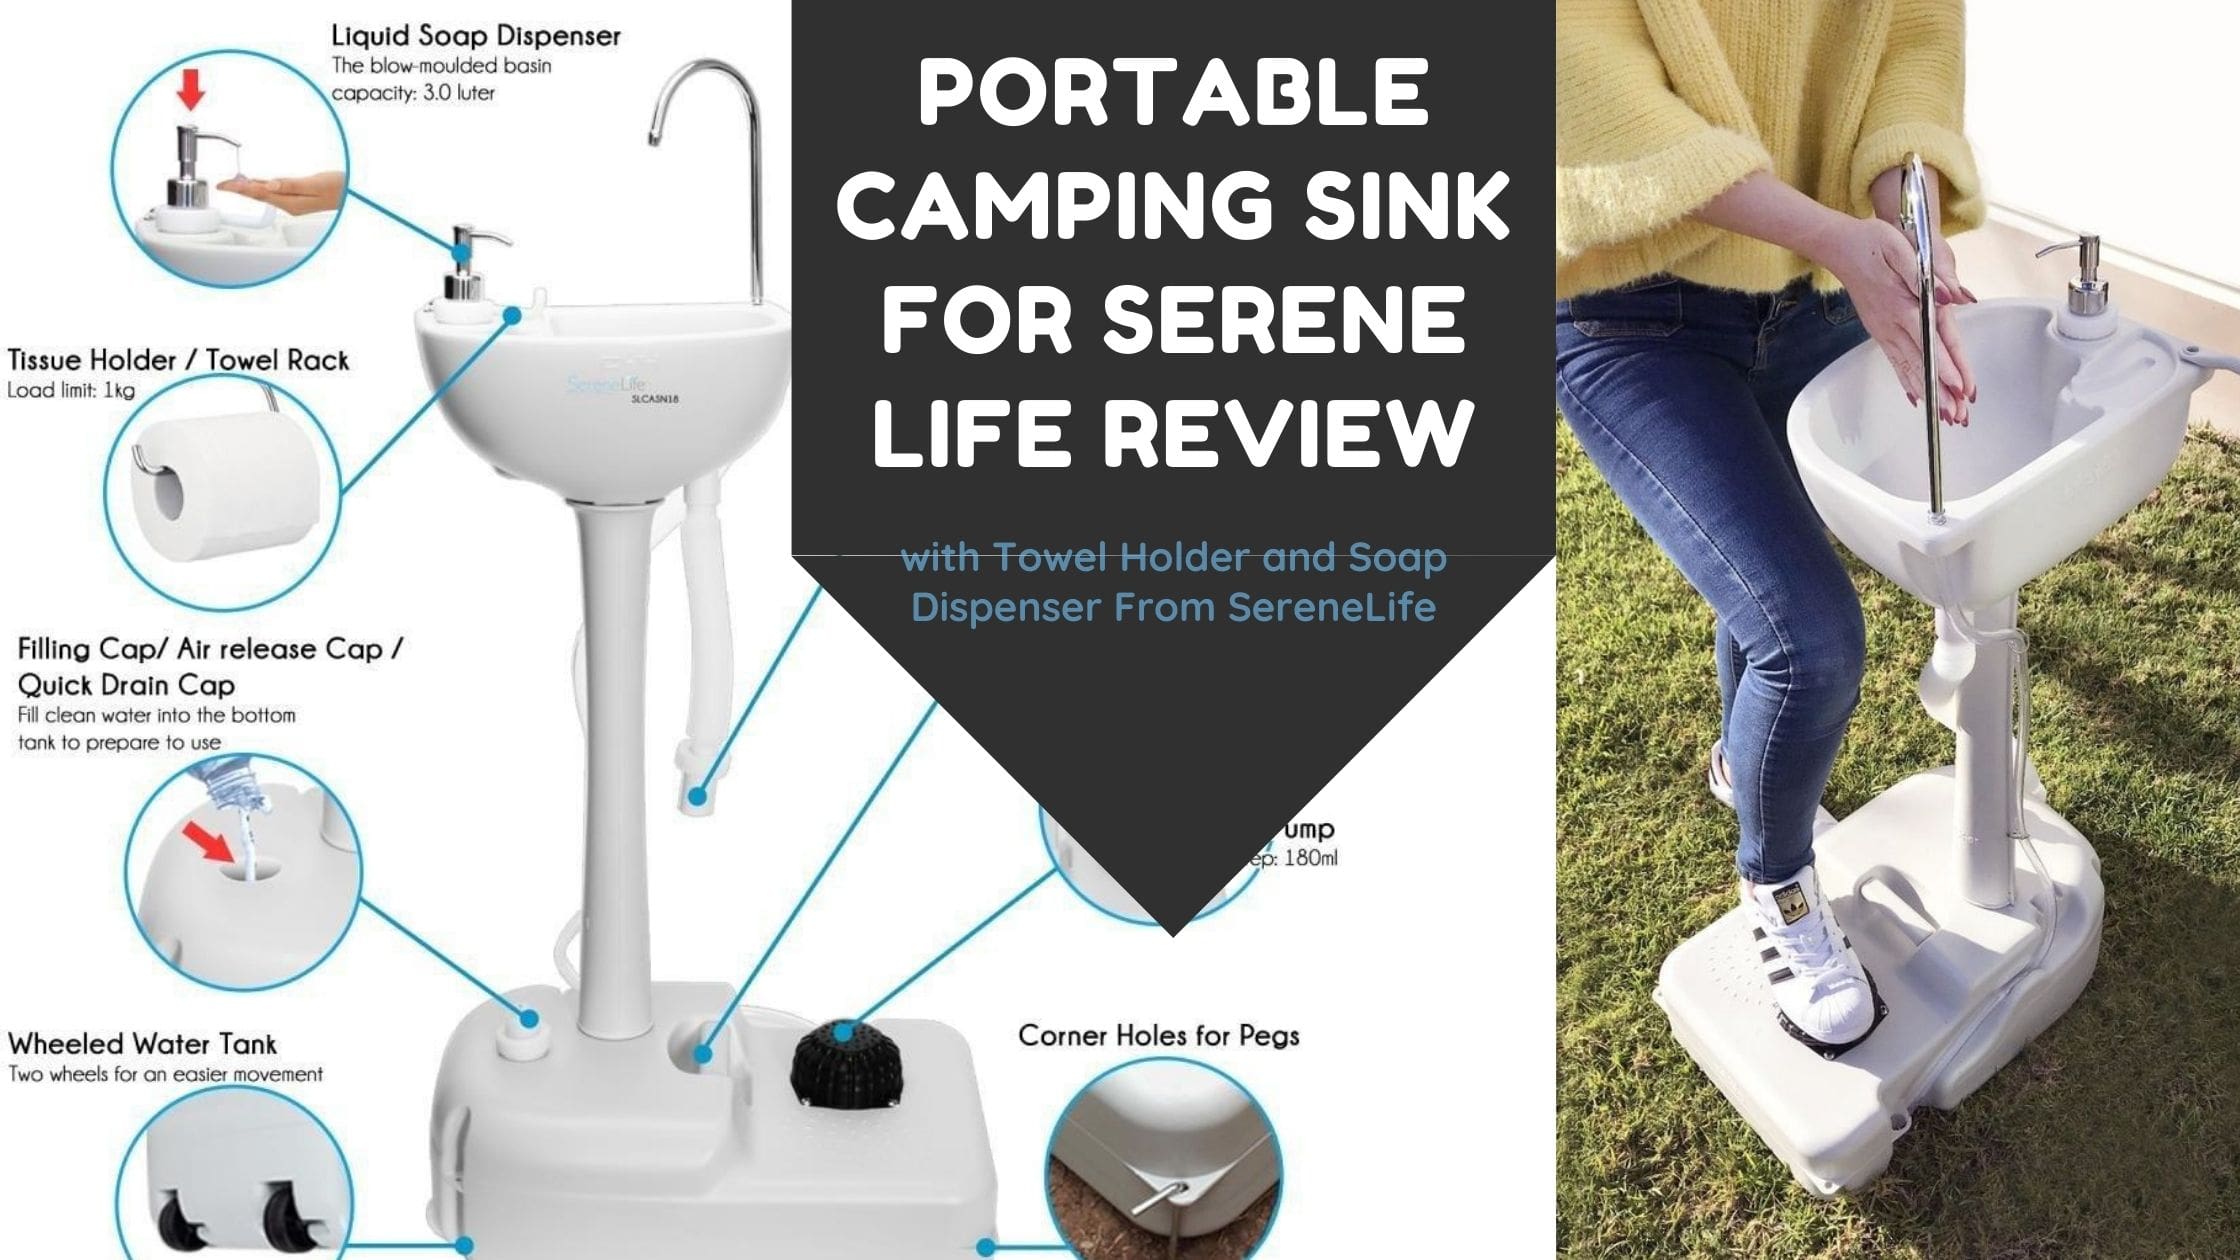 Portable Camping Sink for Serene Life Review